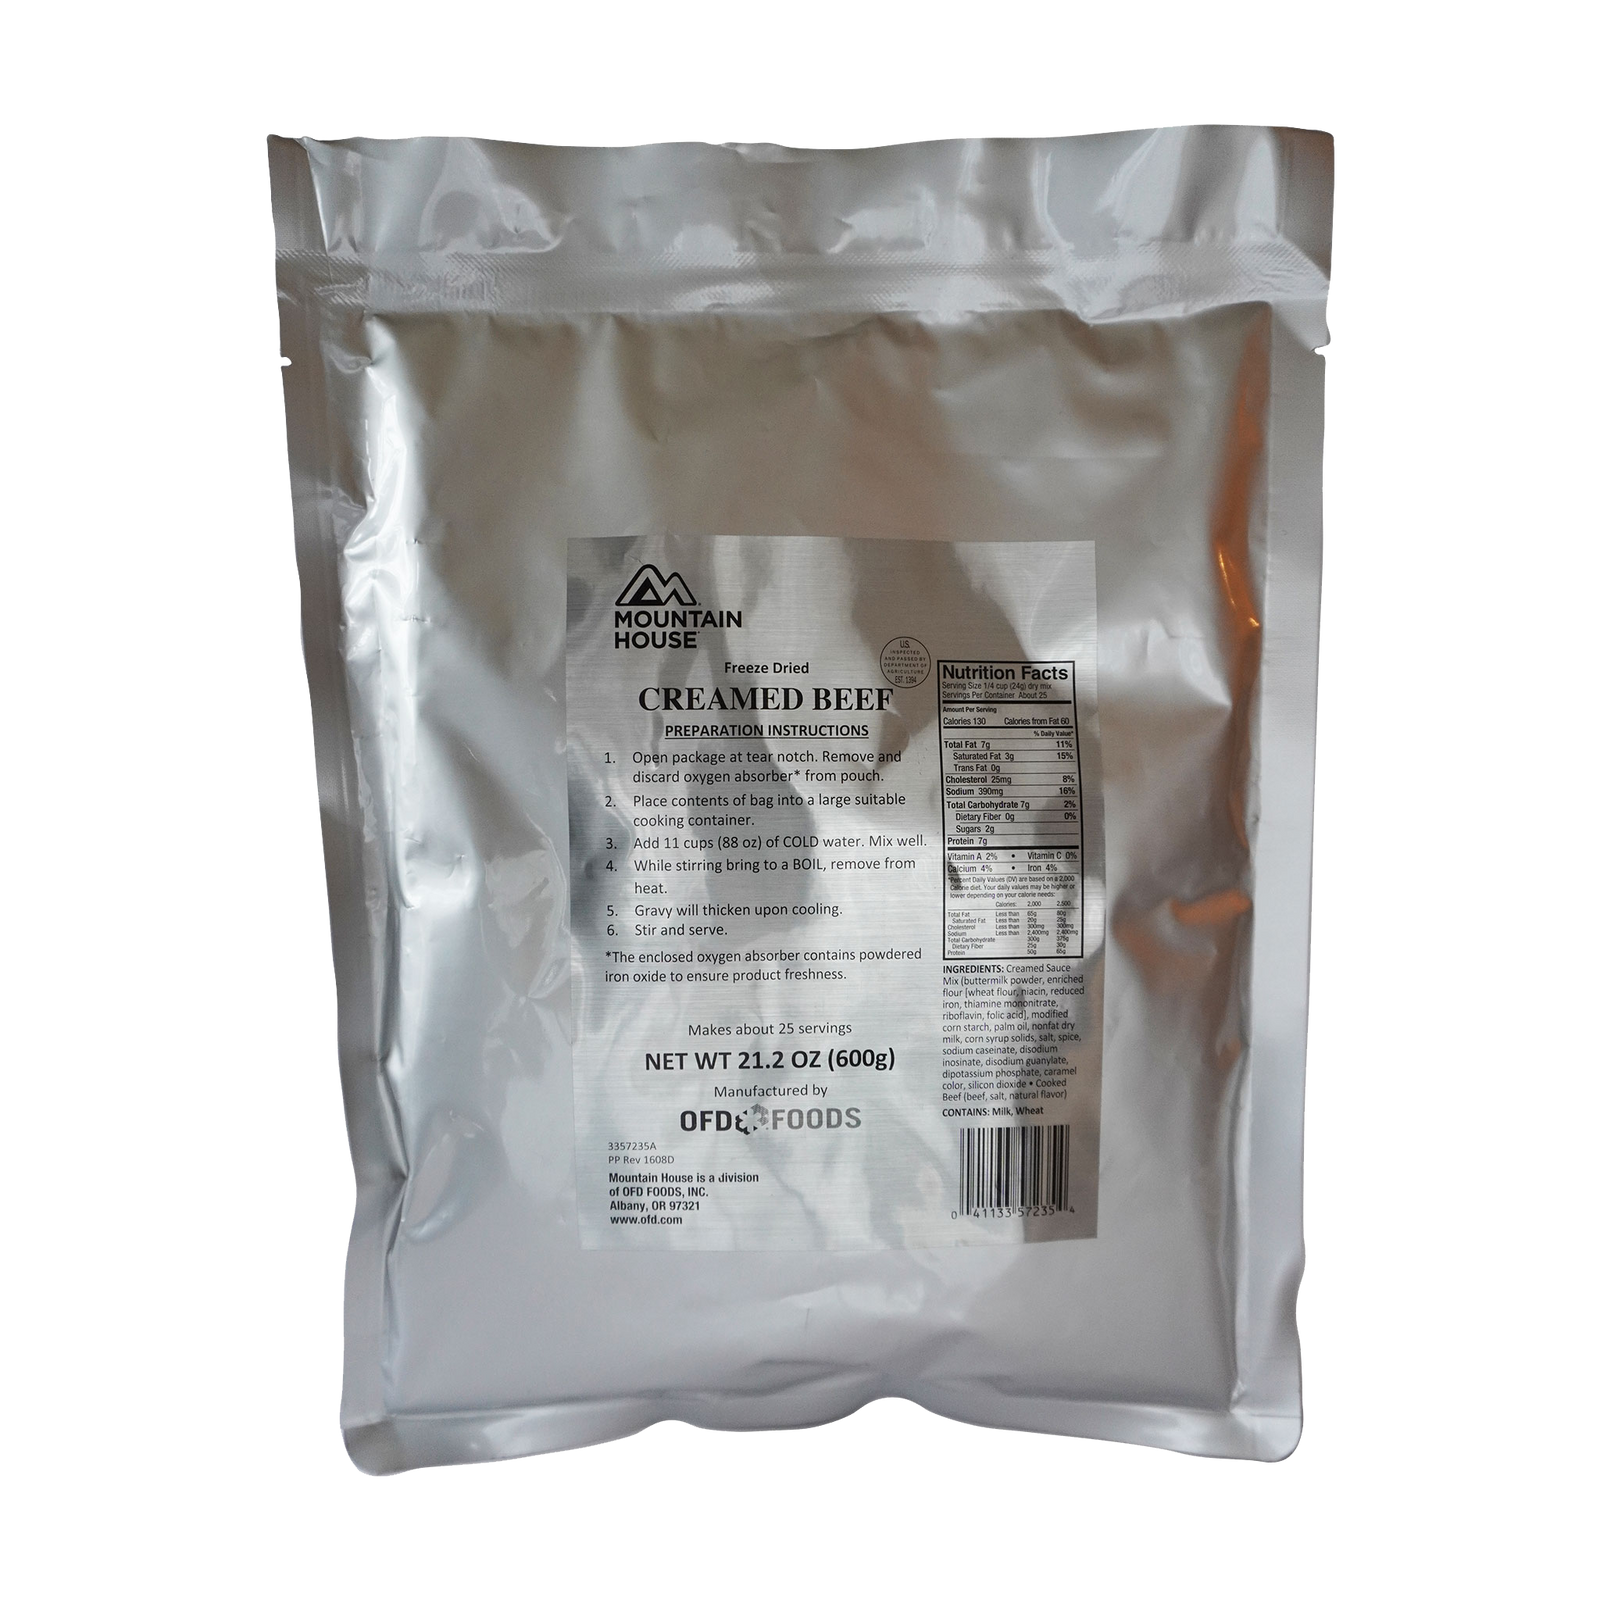 Creamed Beef Gravy 25-Serving Pouch - Military